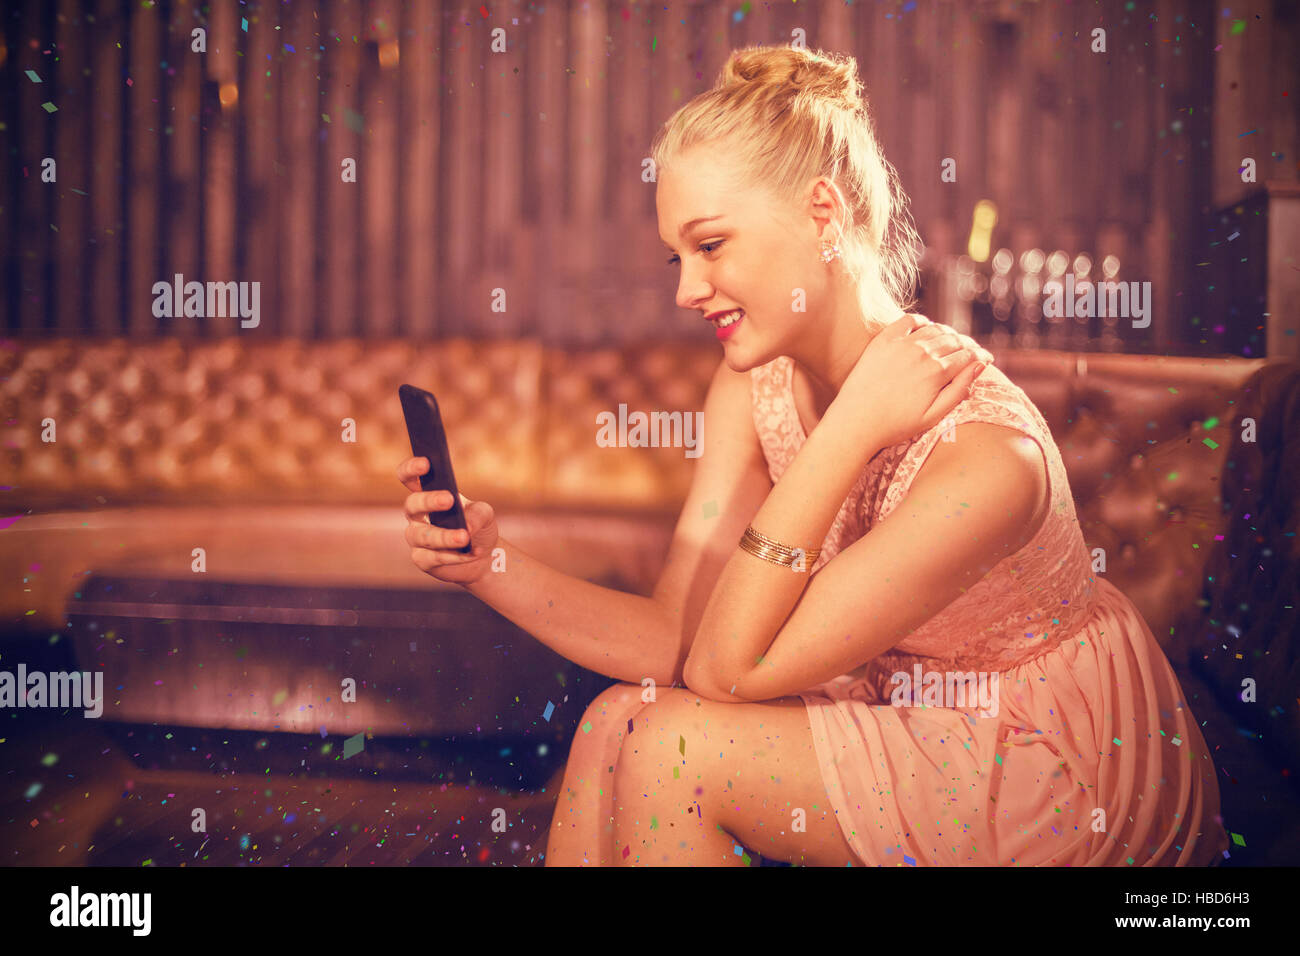 Composite image of beautiful woman sitting on sofa and using mobile phone Stock Photo